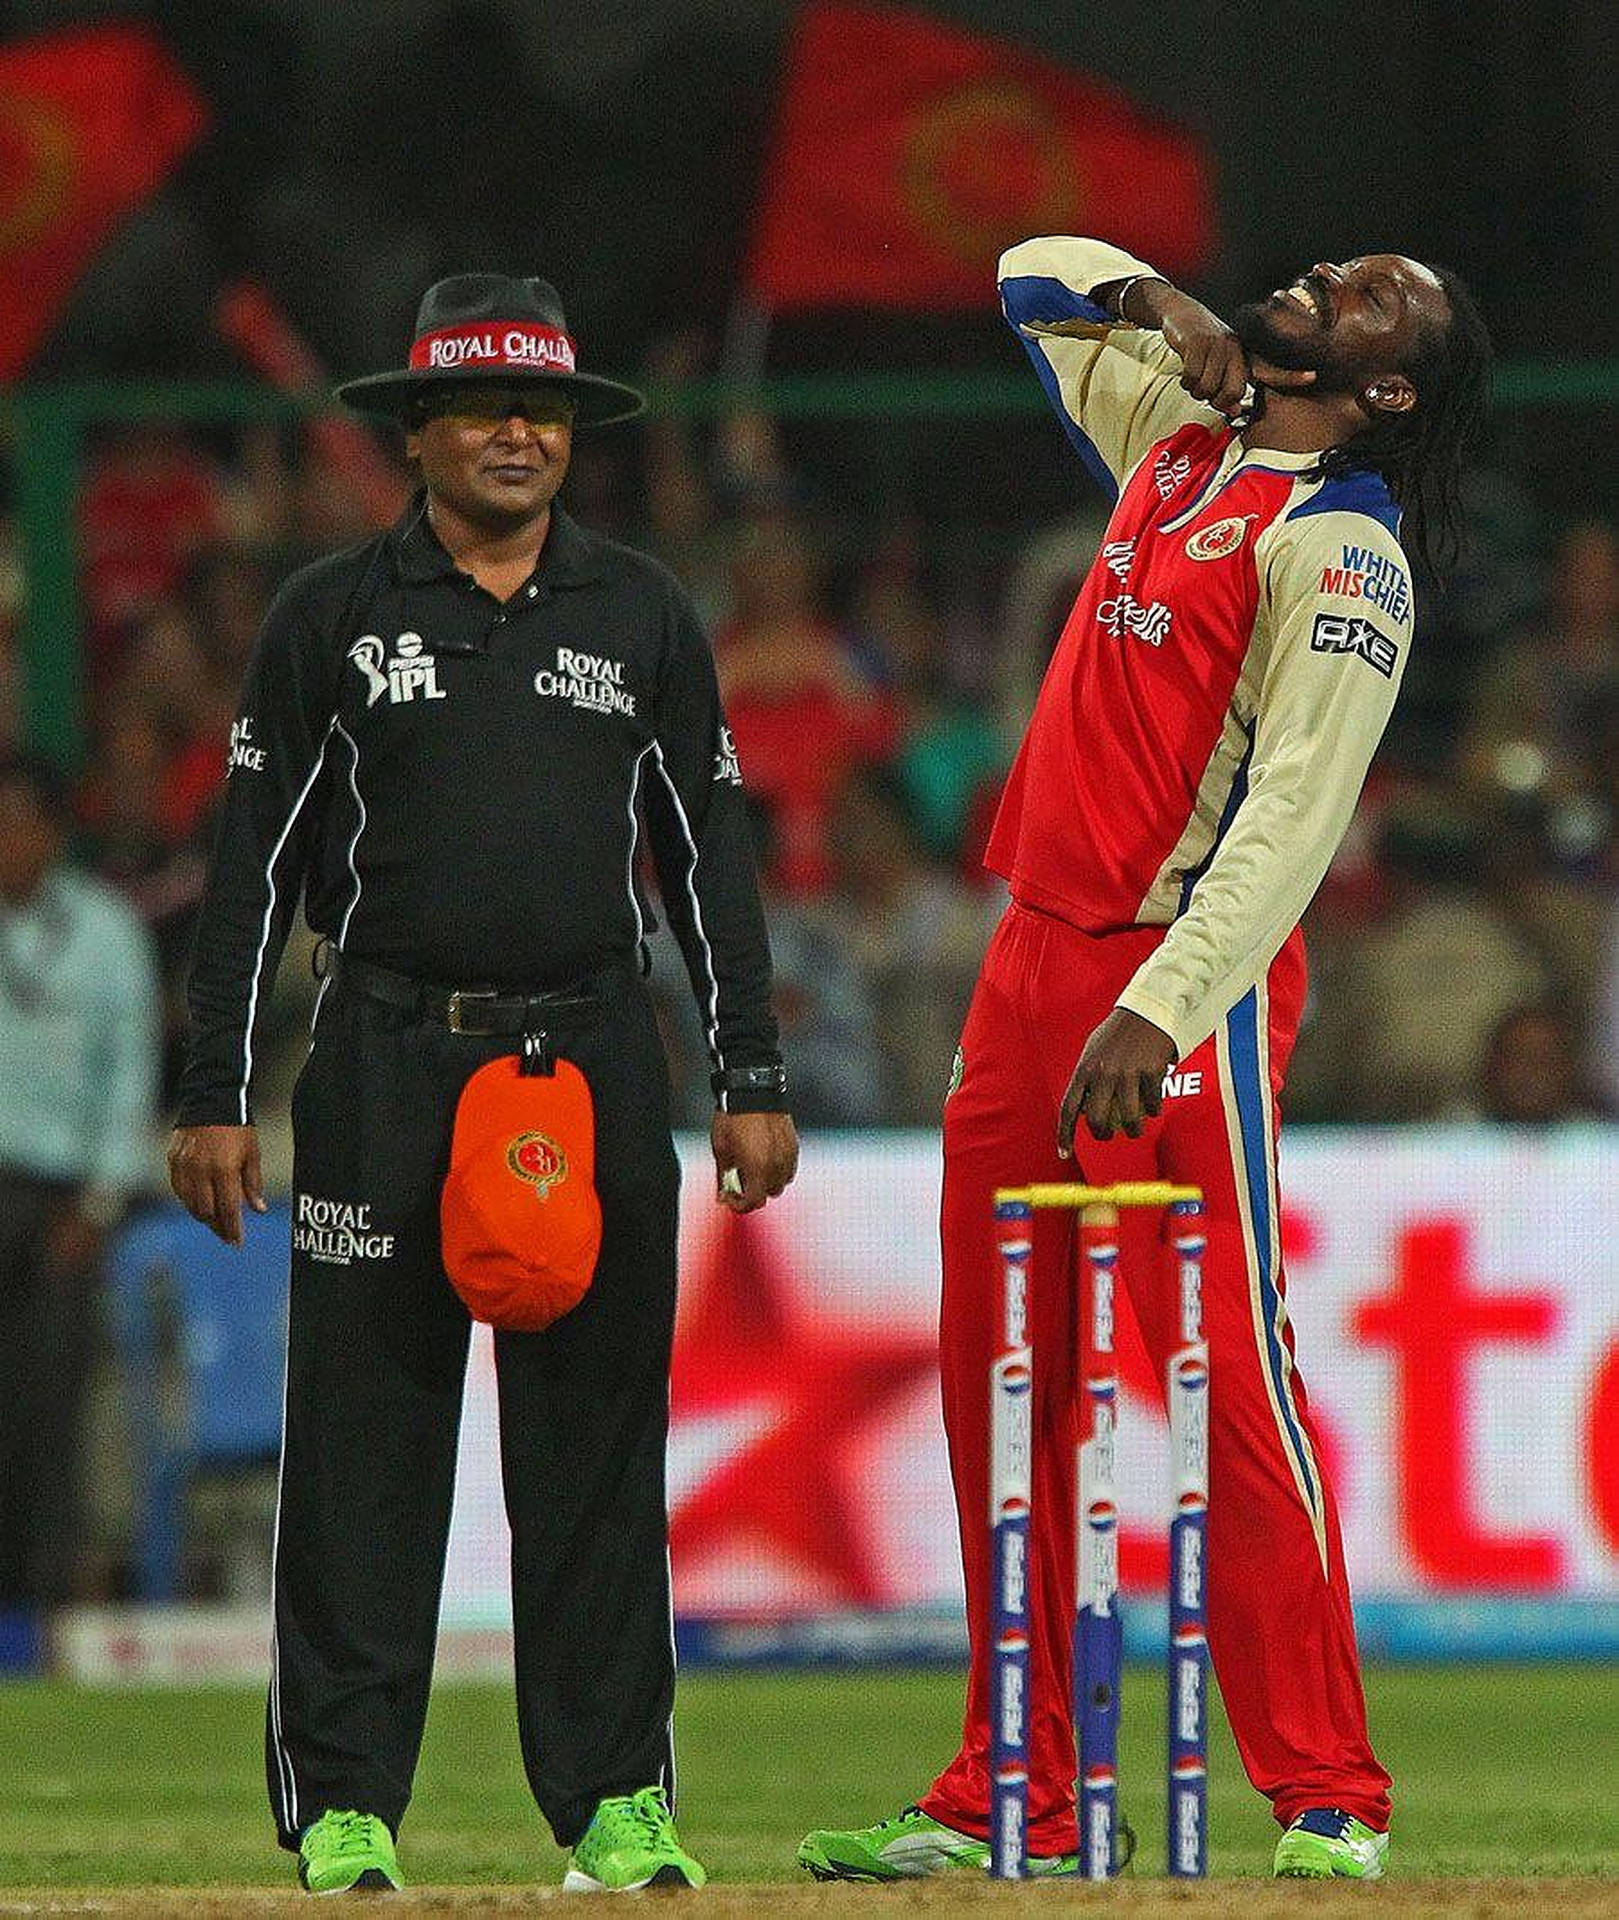 Royal Challengers Bangalore Chris Gayle Background